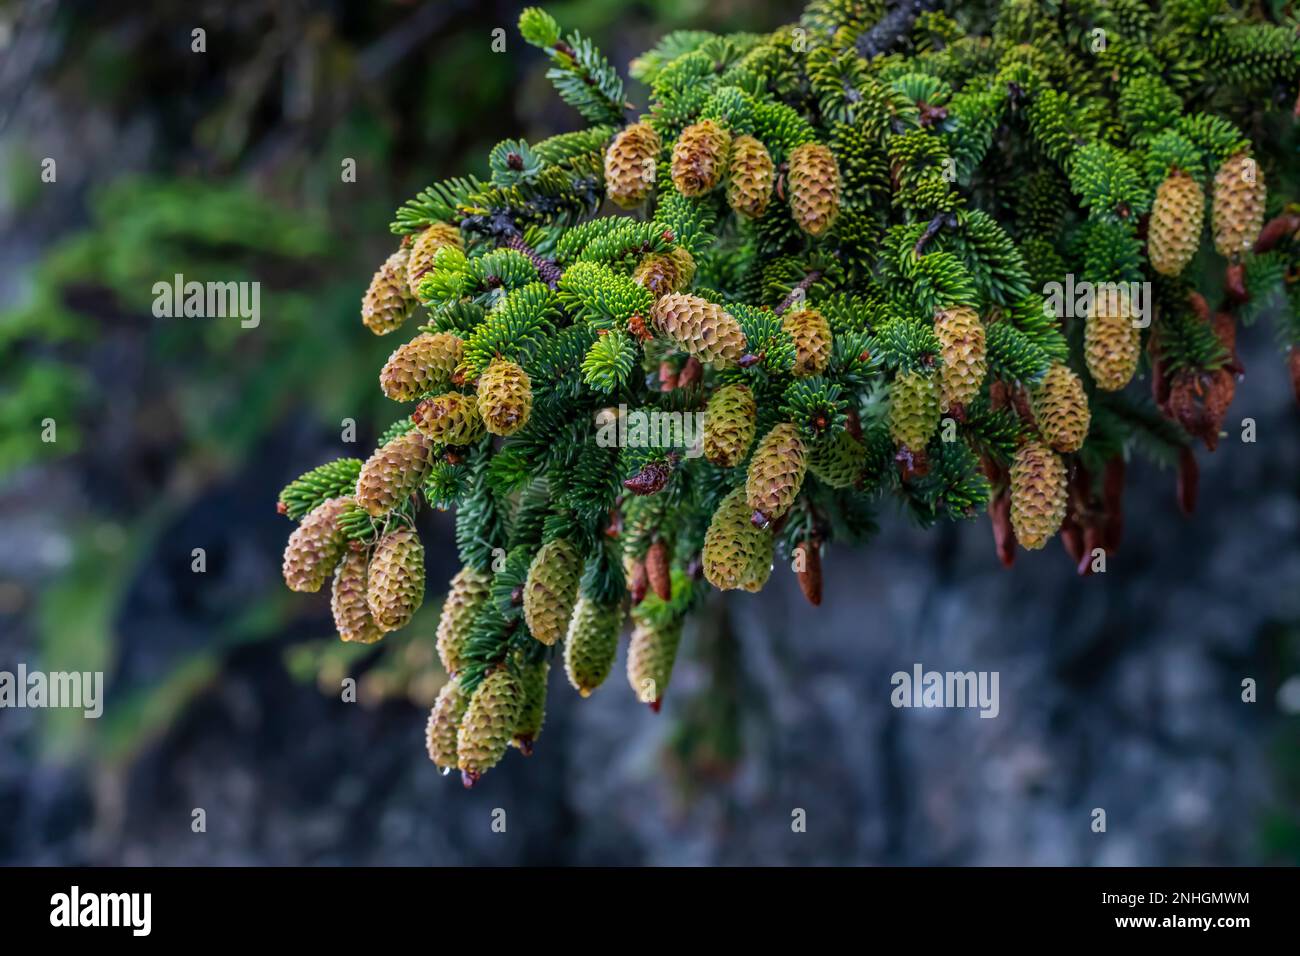 Branches of Sitka Spruce, Picea sitchensis, which thrives in the coastal strand of forest adjacent to Shi Shi Beach in Olympic National Park, Washingt Stock Photo